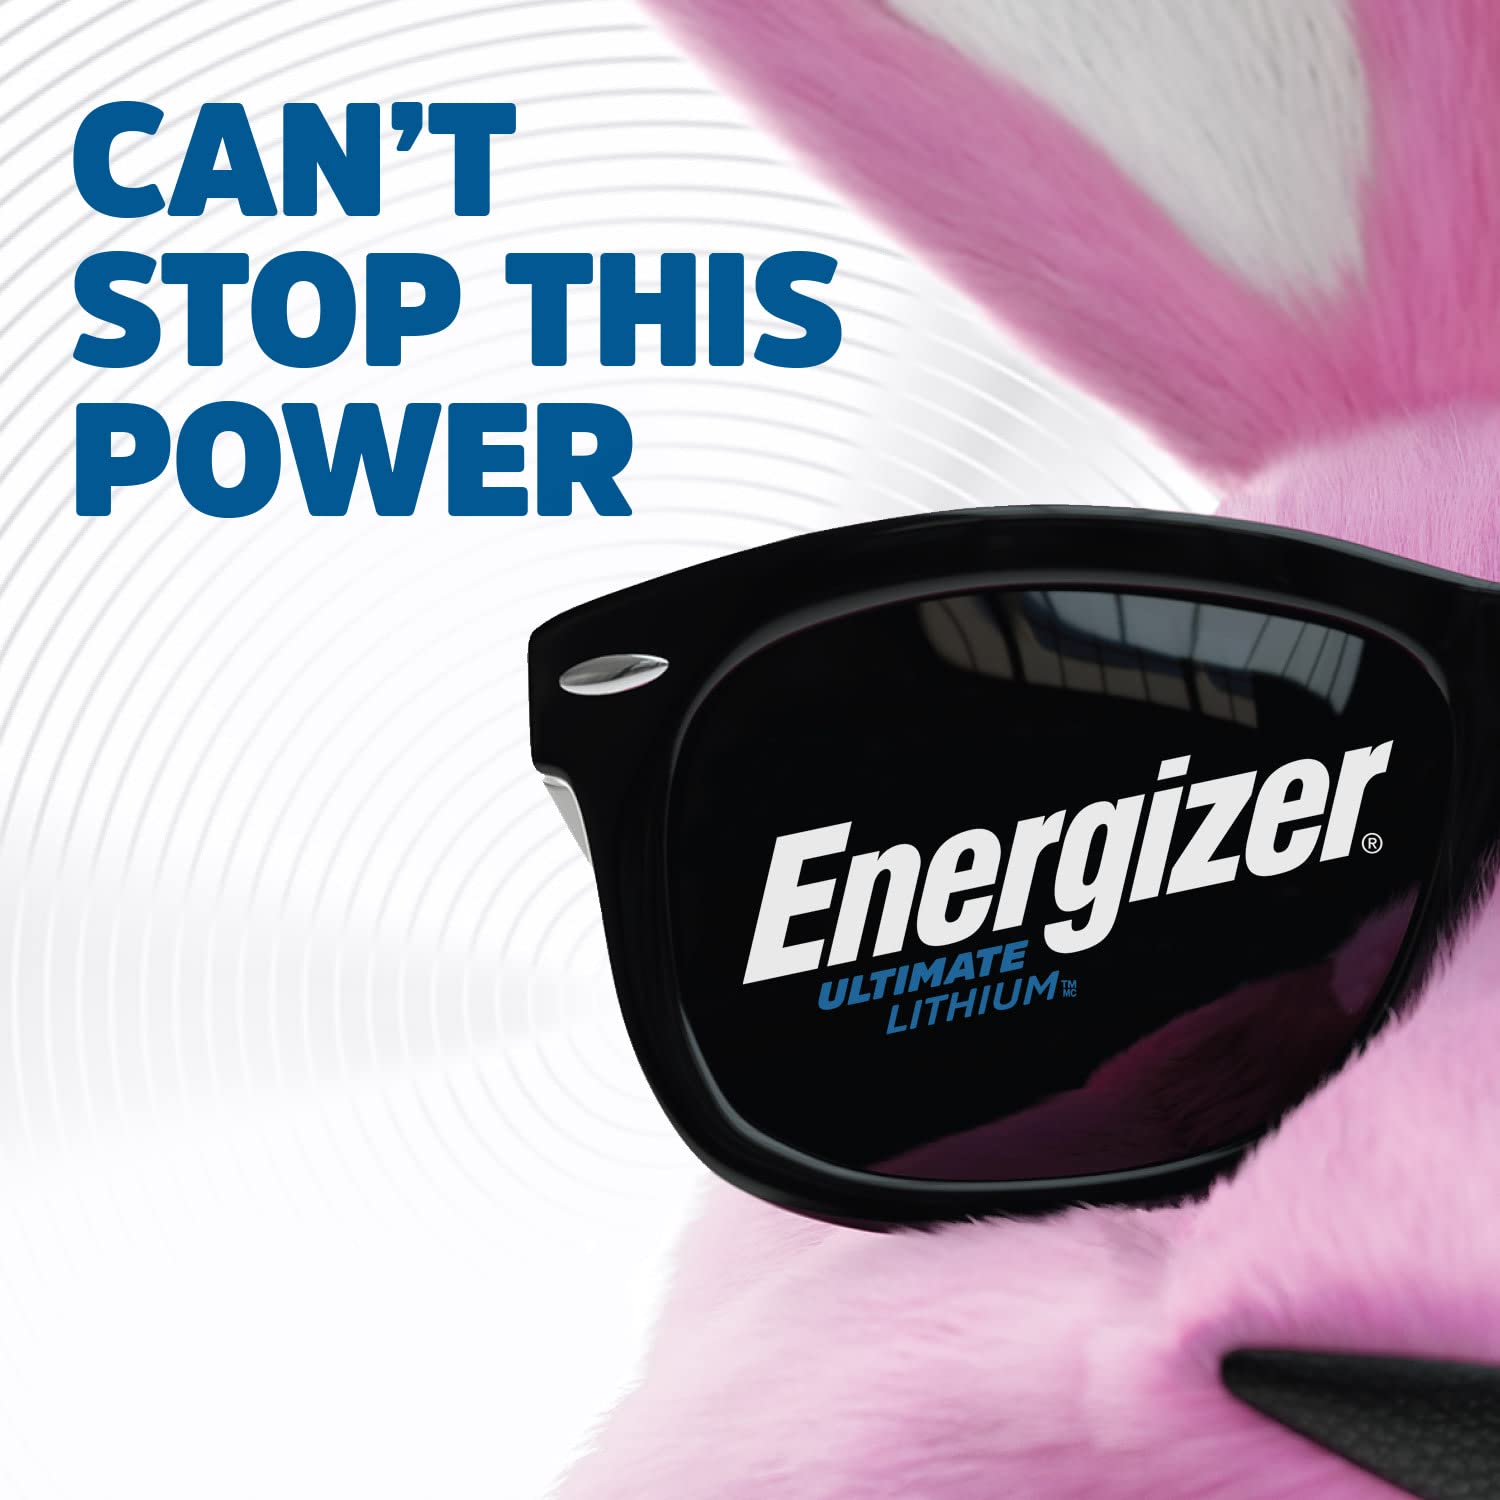 Energizer AA Lithium Batteries, World's Longest Lasting Double A Battery, Ultimate Lithium (24 Battery Count)